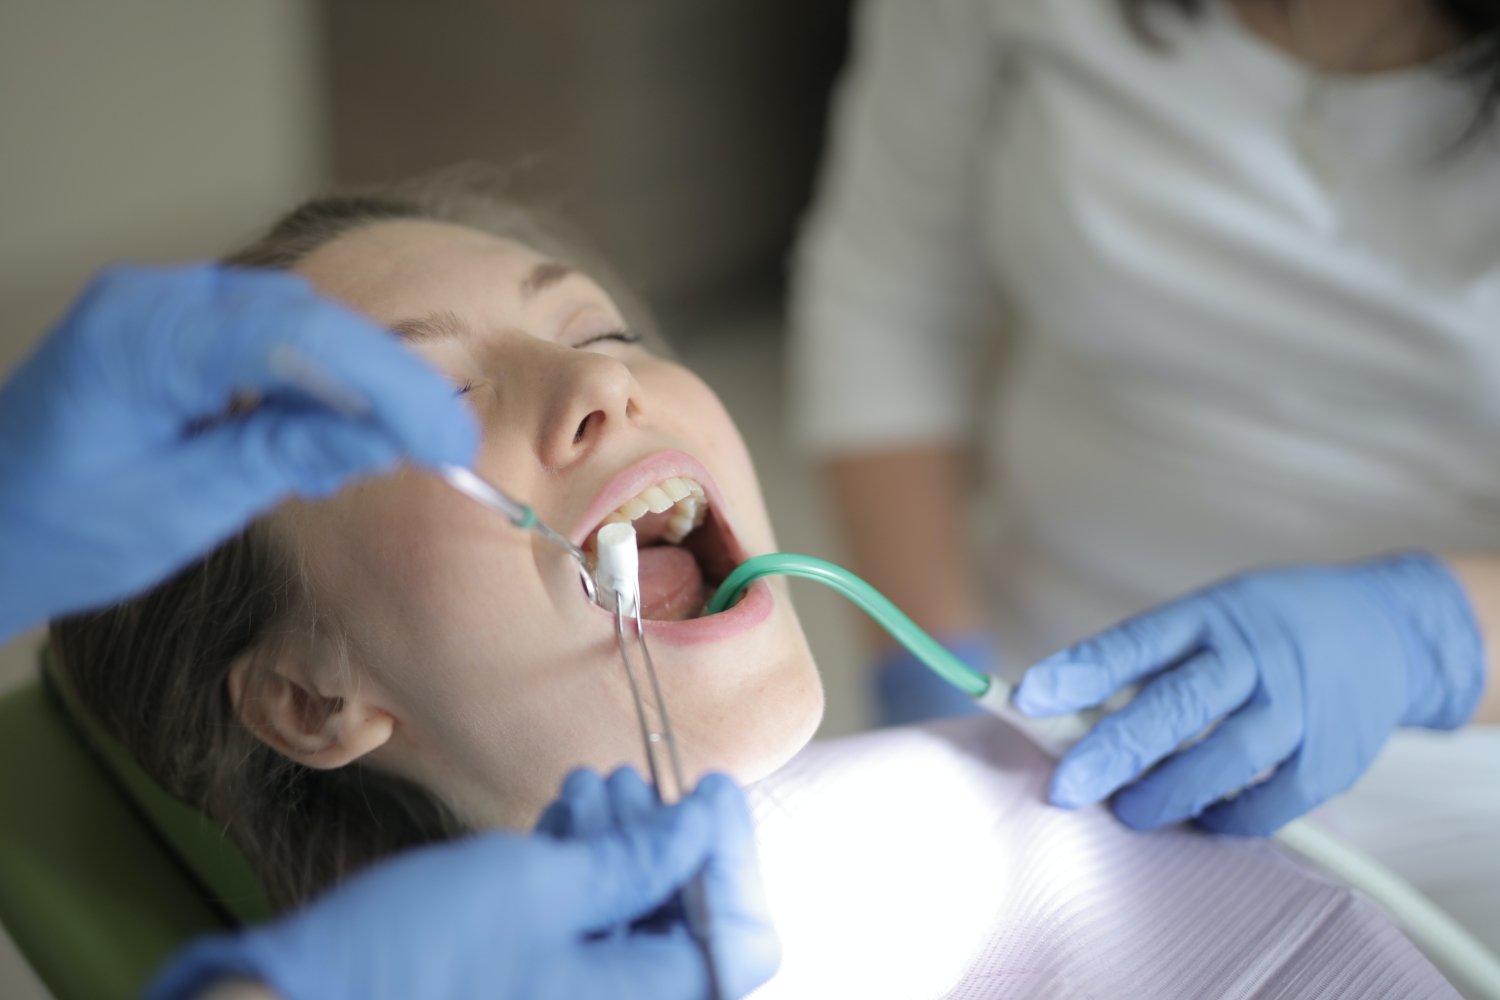 A patient receiving dental care from an English speaking dentist in Korea